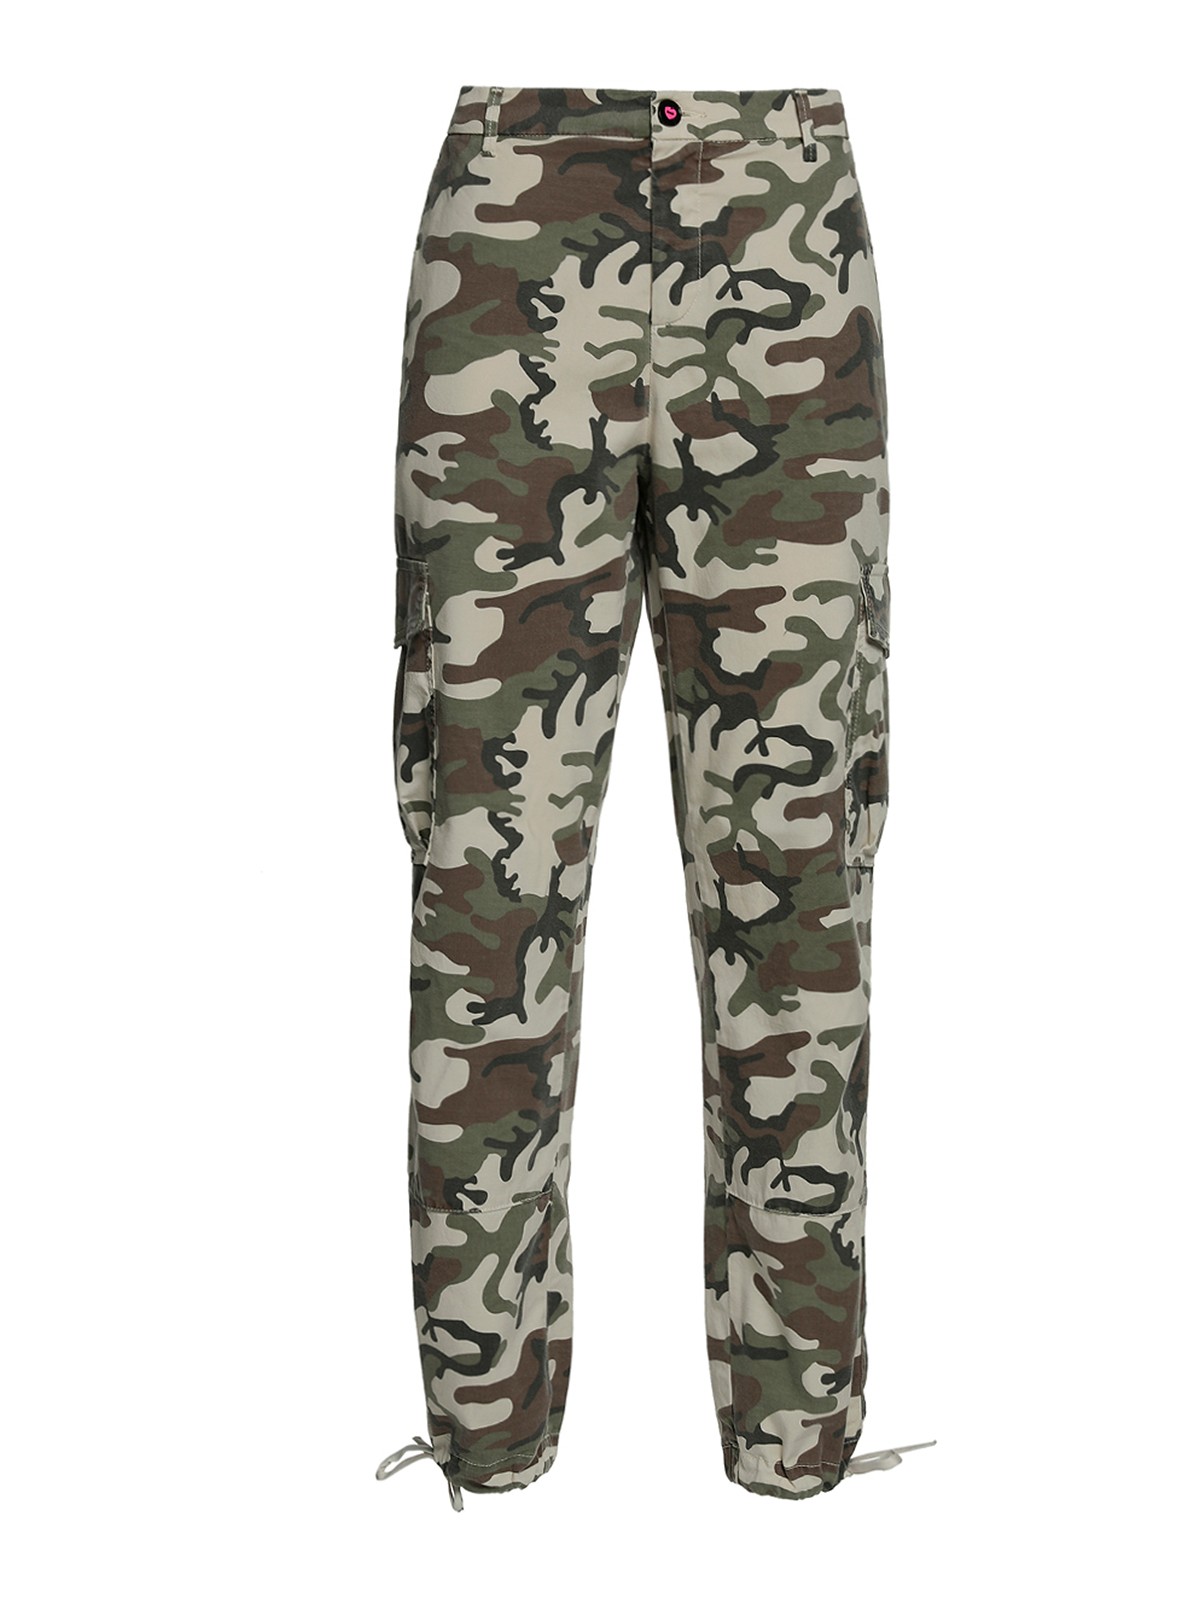 I Love My Pants Cotton Cargo Camouflage Trousers In Green